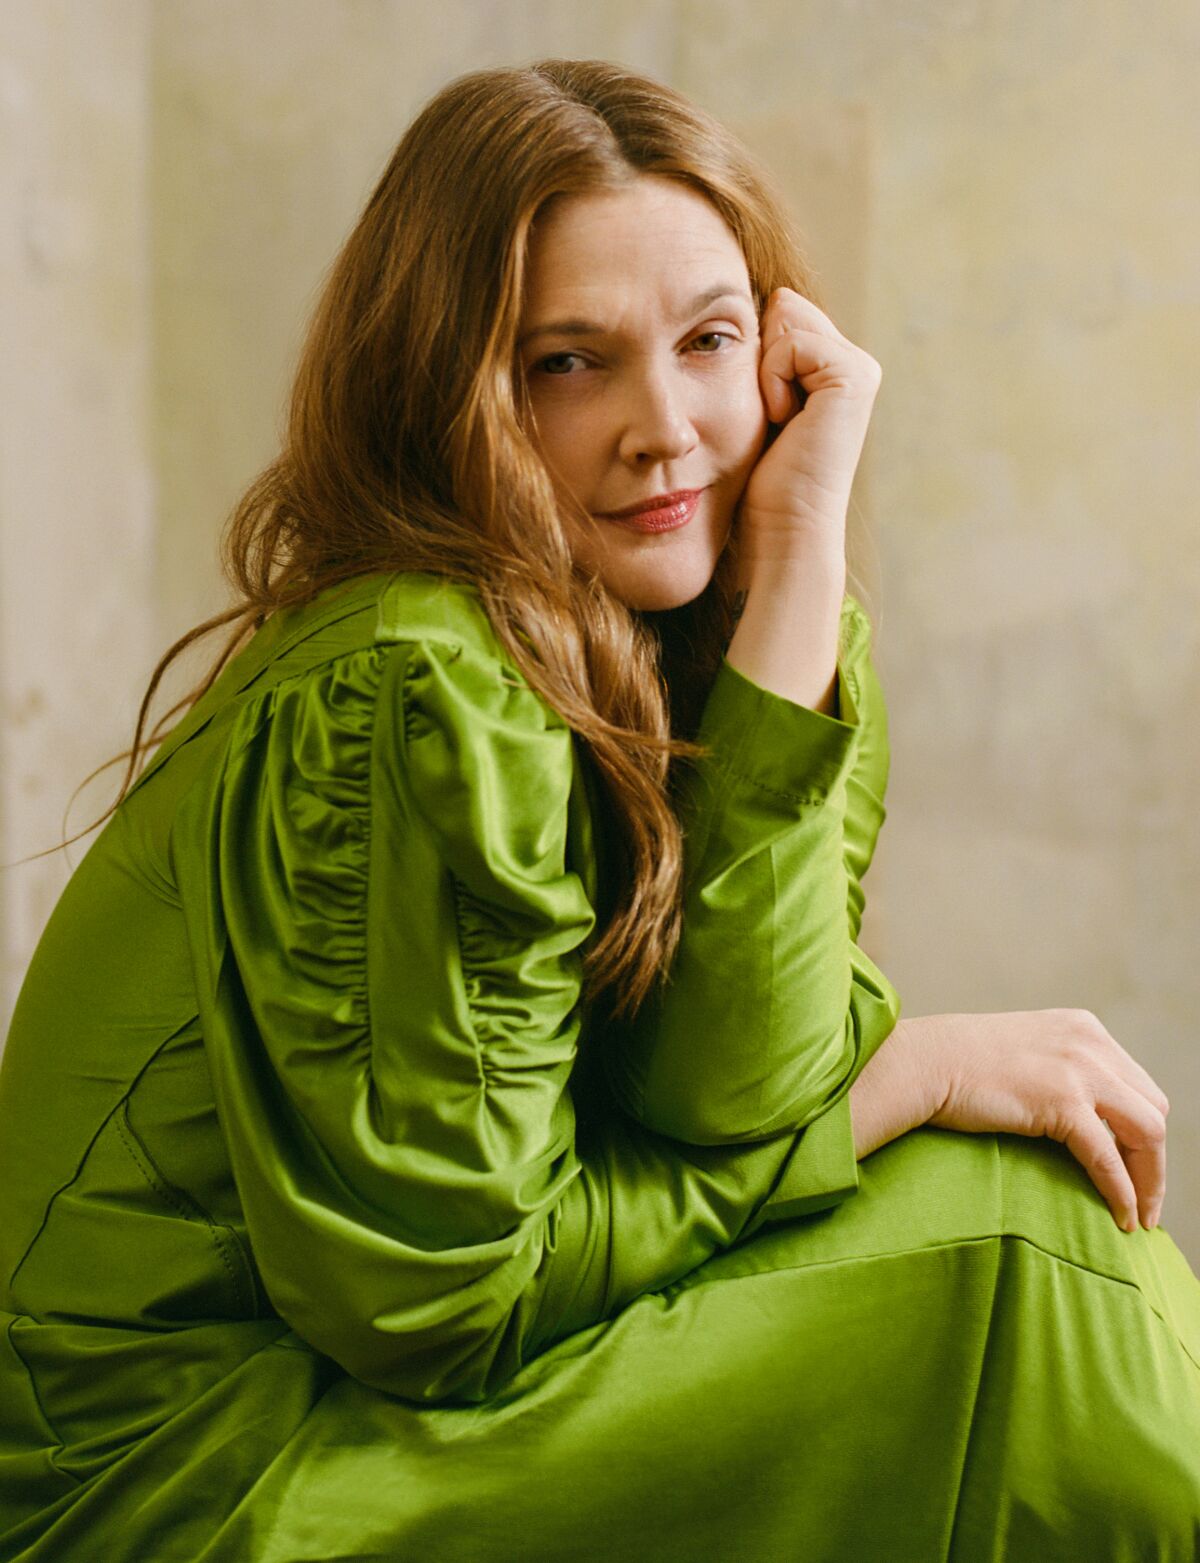 A woman in a shiny green outfit sits sideways with arms crossed and one hand by her left cheek